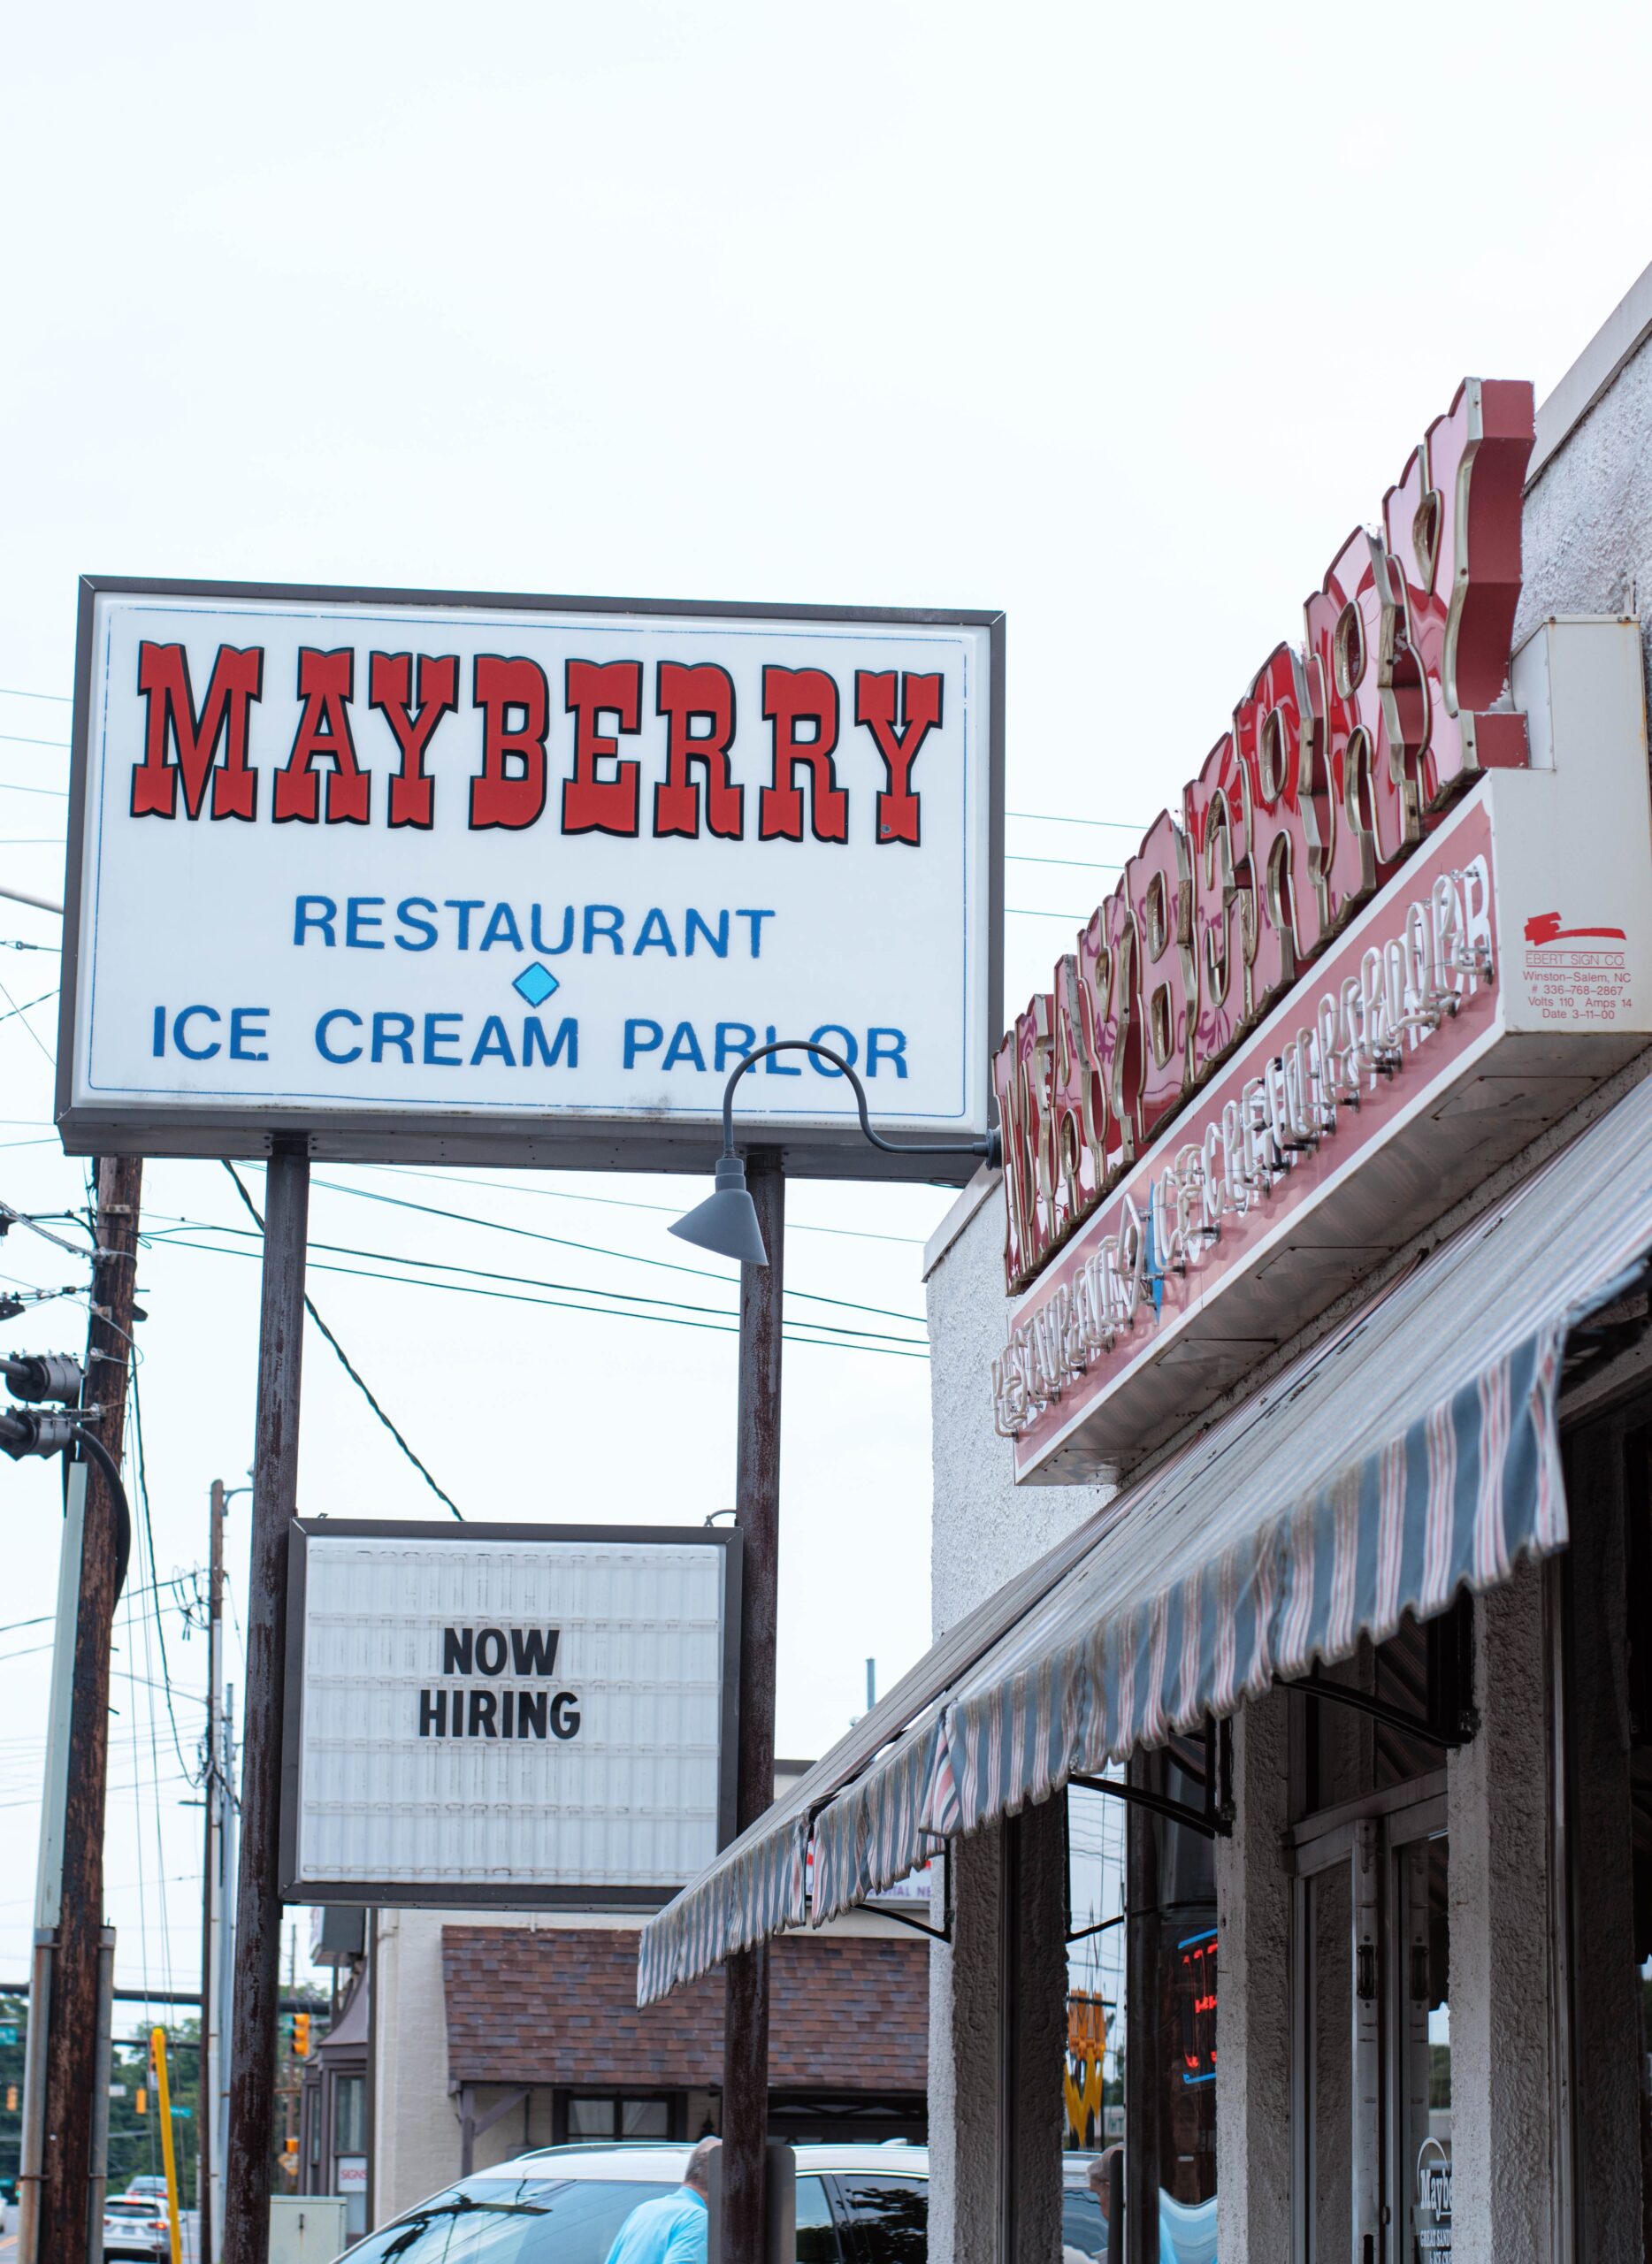 Mayberry's in High Point, NC sign.